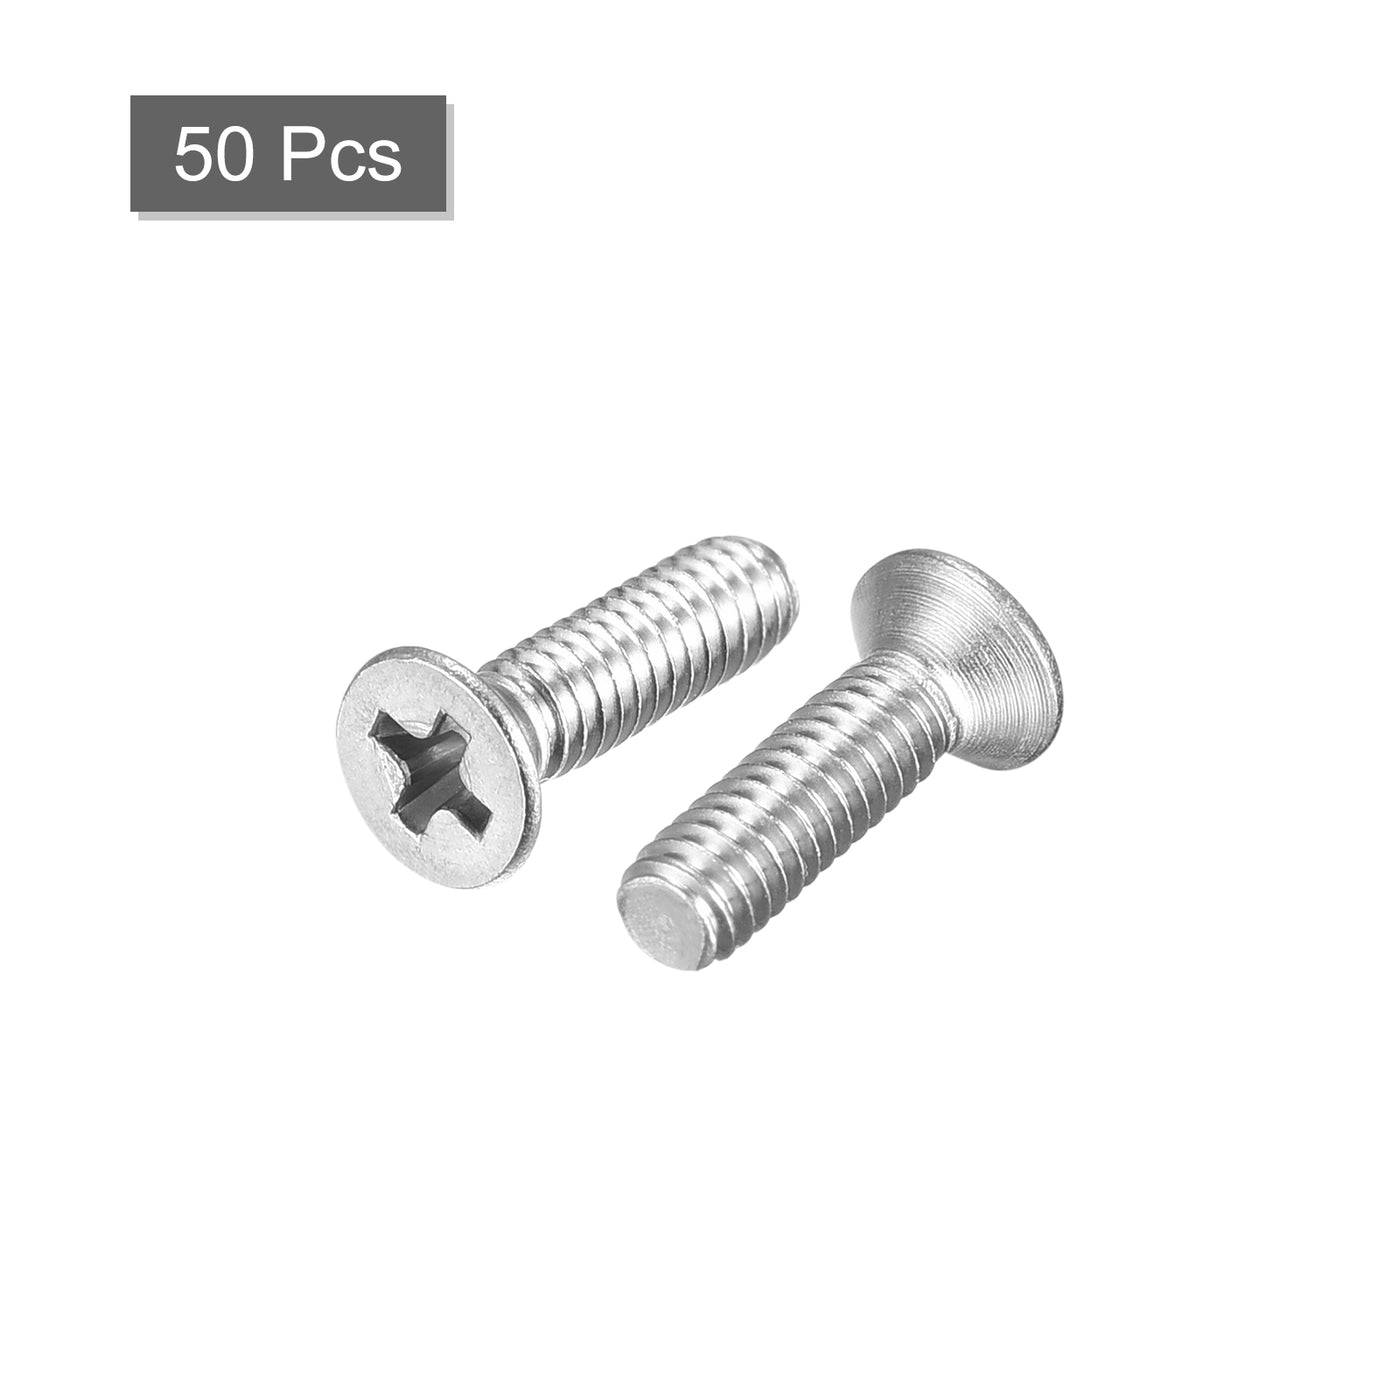 uxcell Uxcell 8#-32x5/8" Flat Head Machine Screws Phillips 304 Stainless Steel Bolts 50pcs